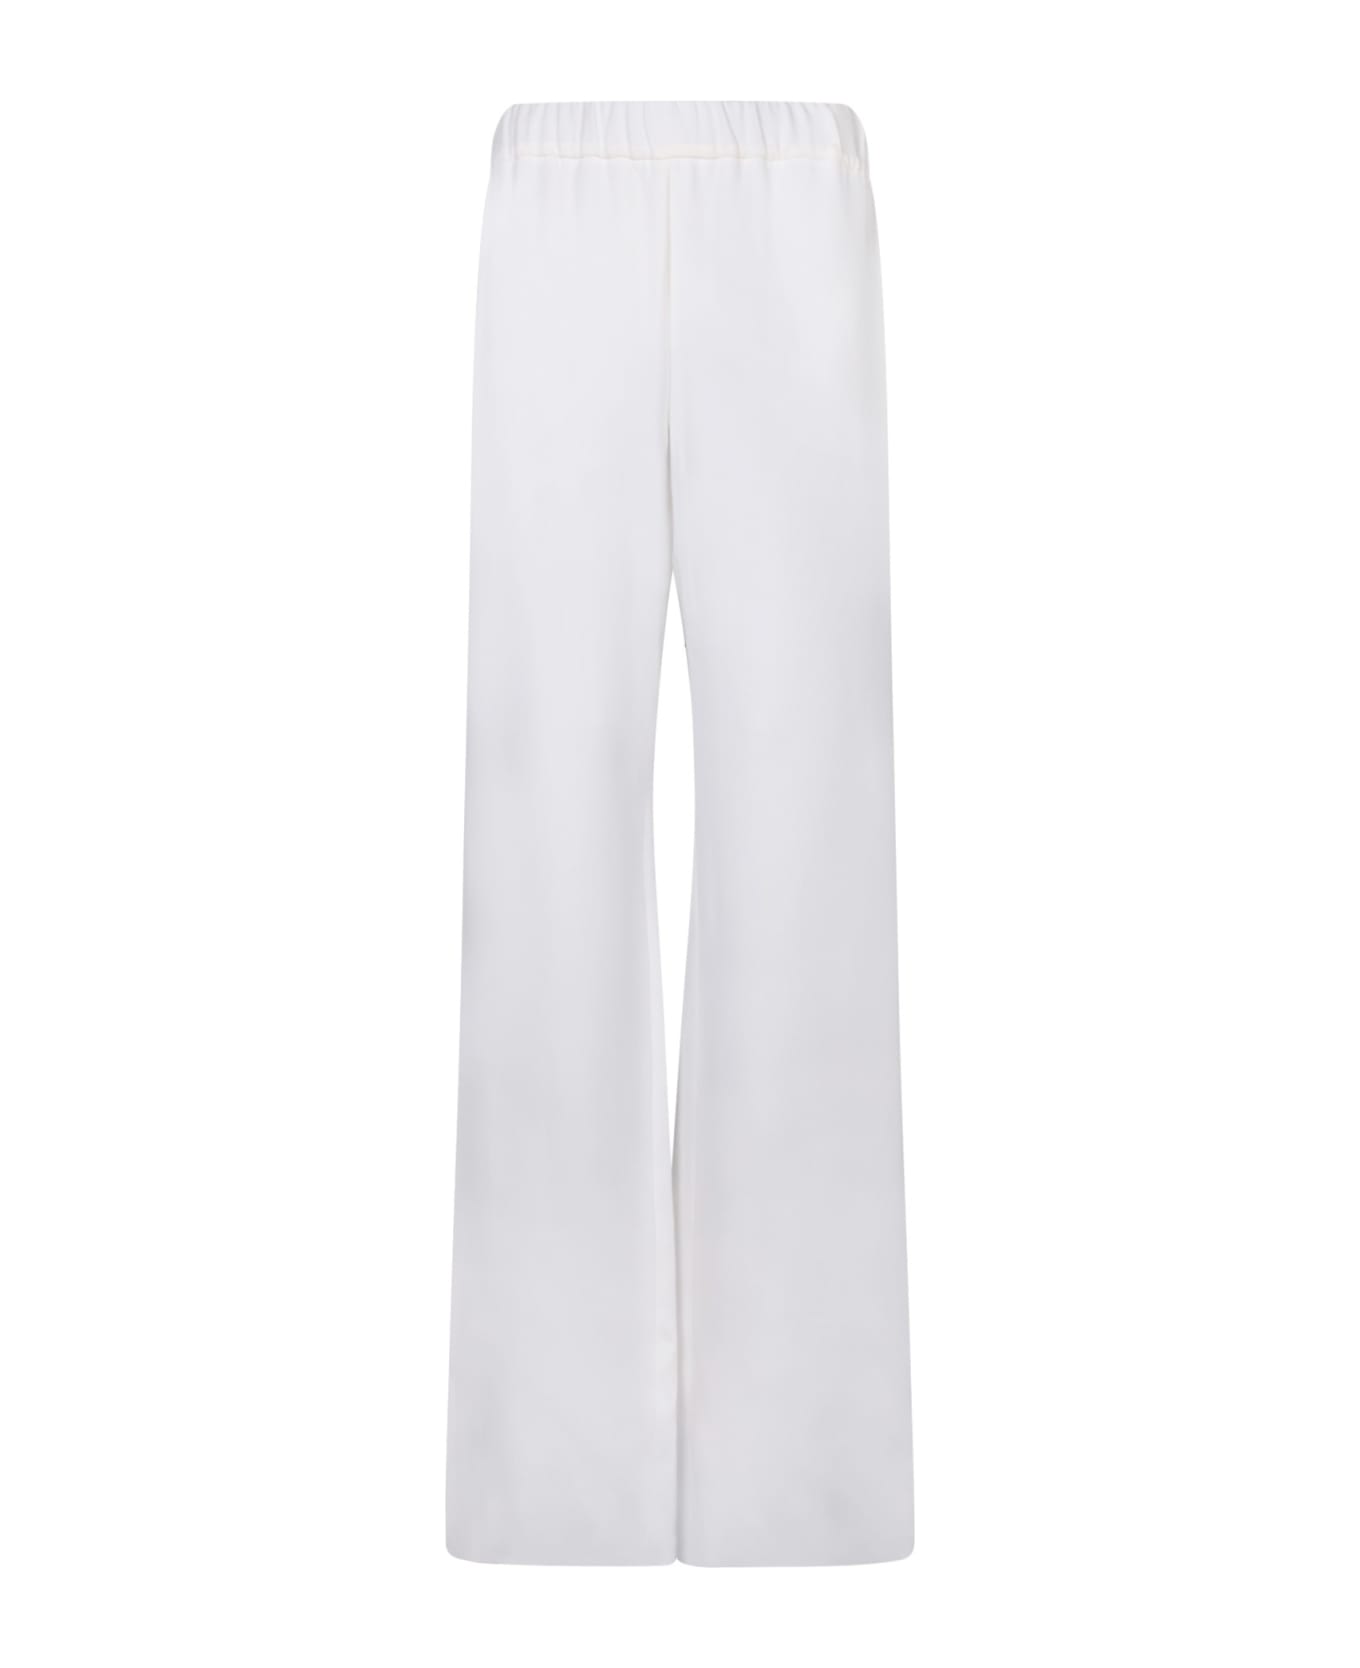 Valentino Cady Ivory Trousers - White